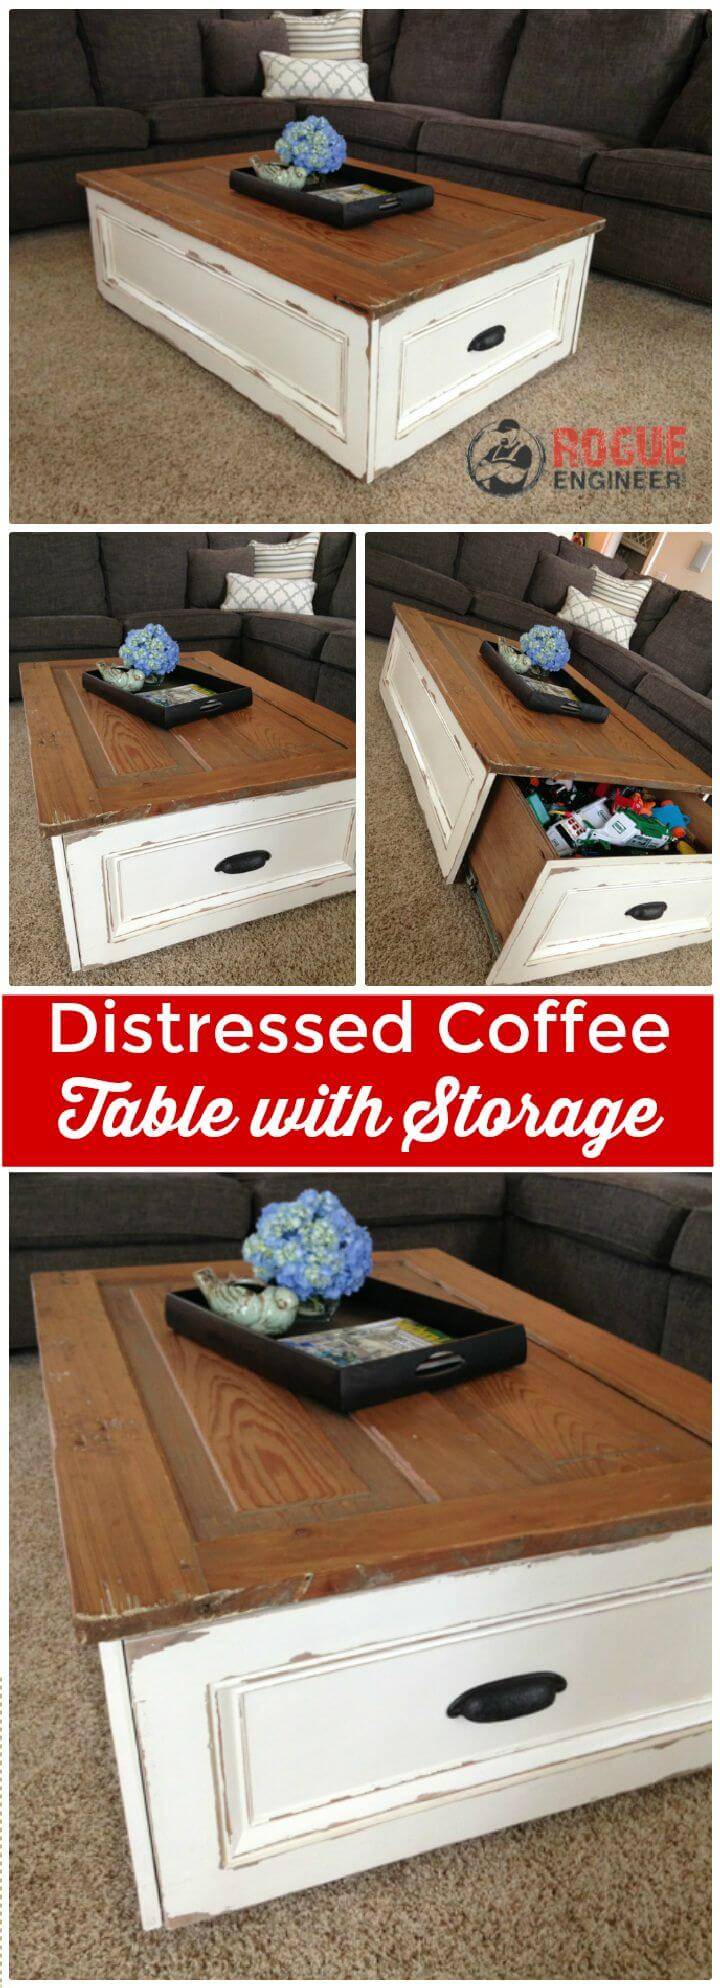 DIY Distressed Coffee Table with Storage